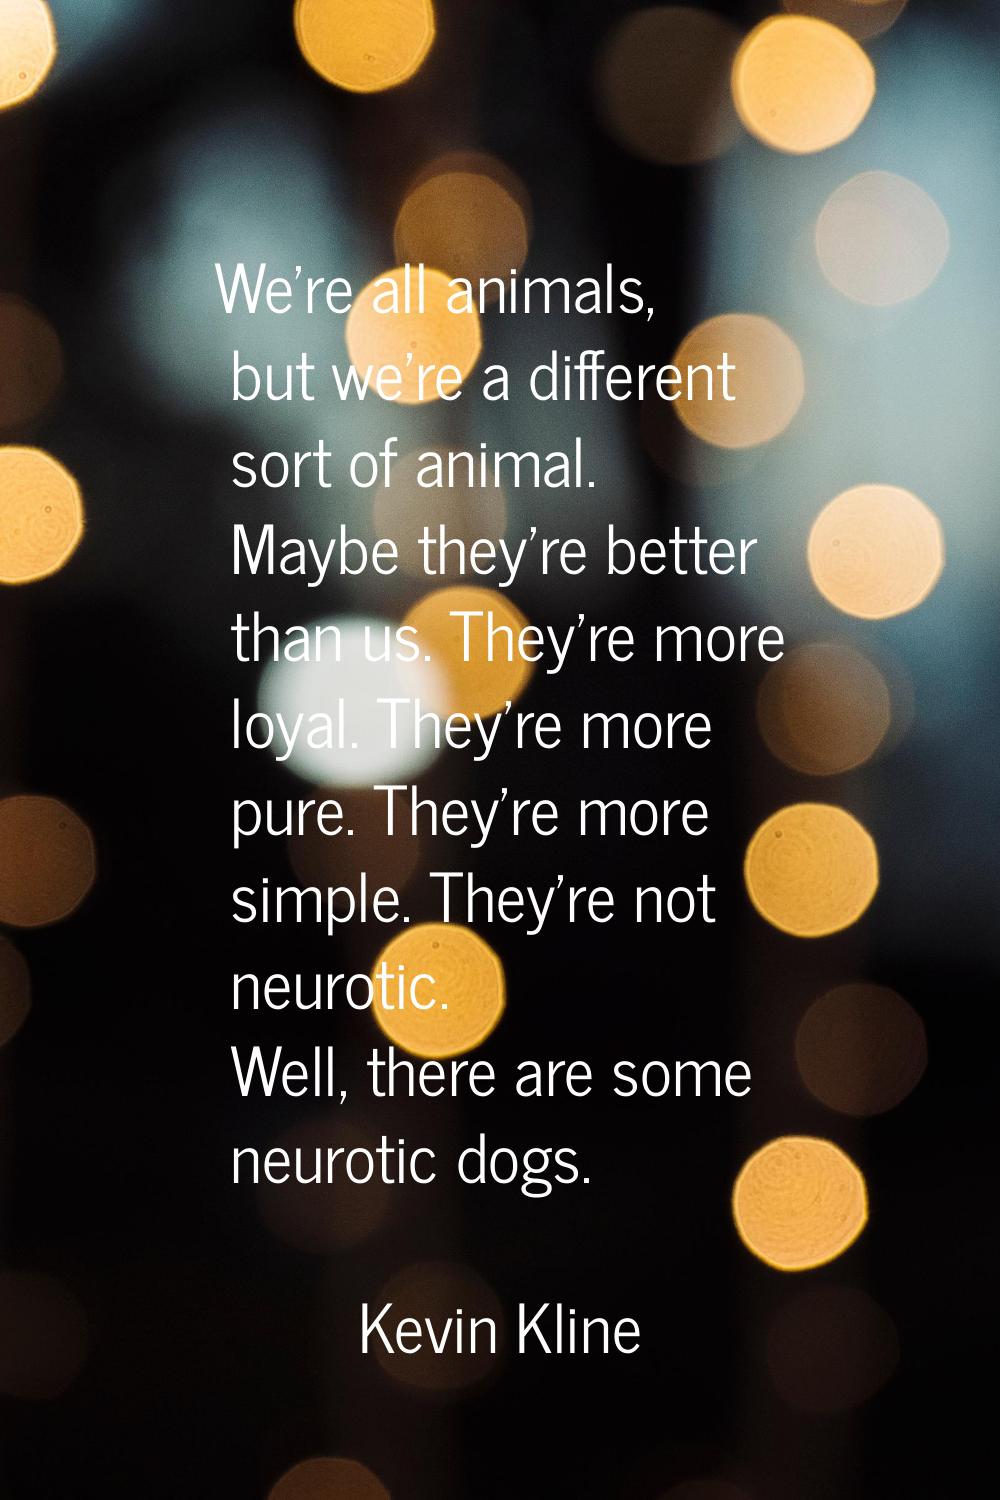 We're all animals, but we're a different sort of animal. Maybe they're better than us. They're more